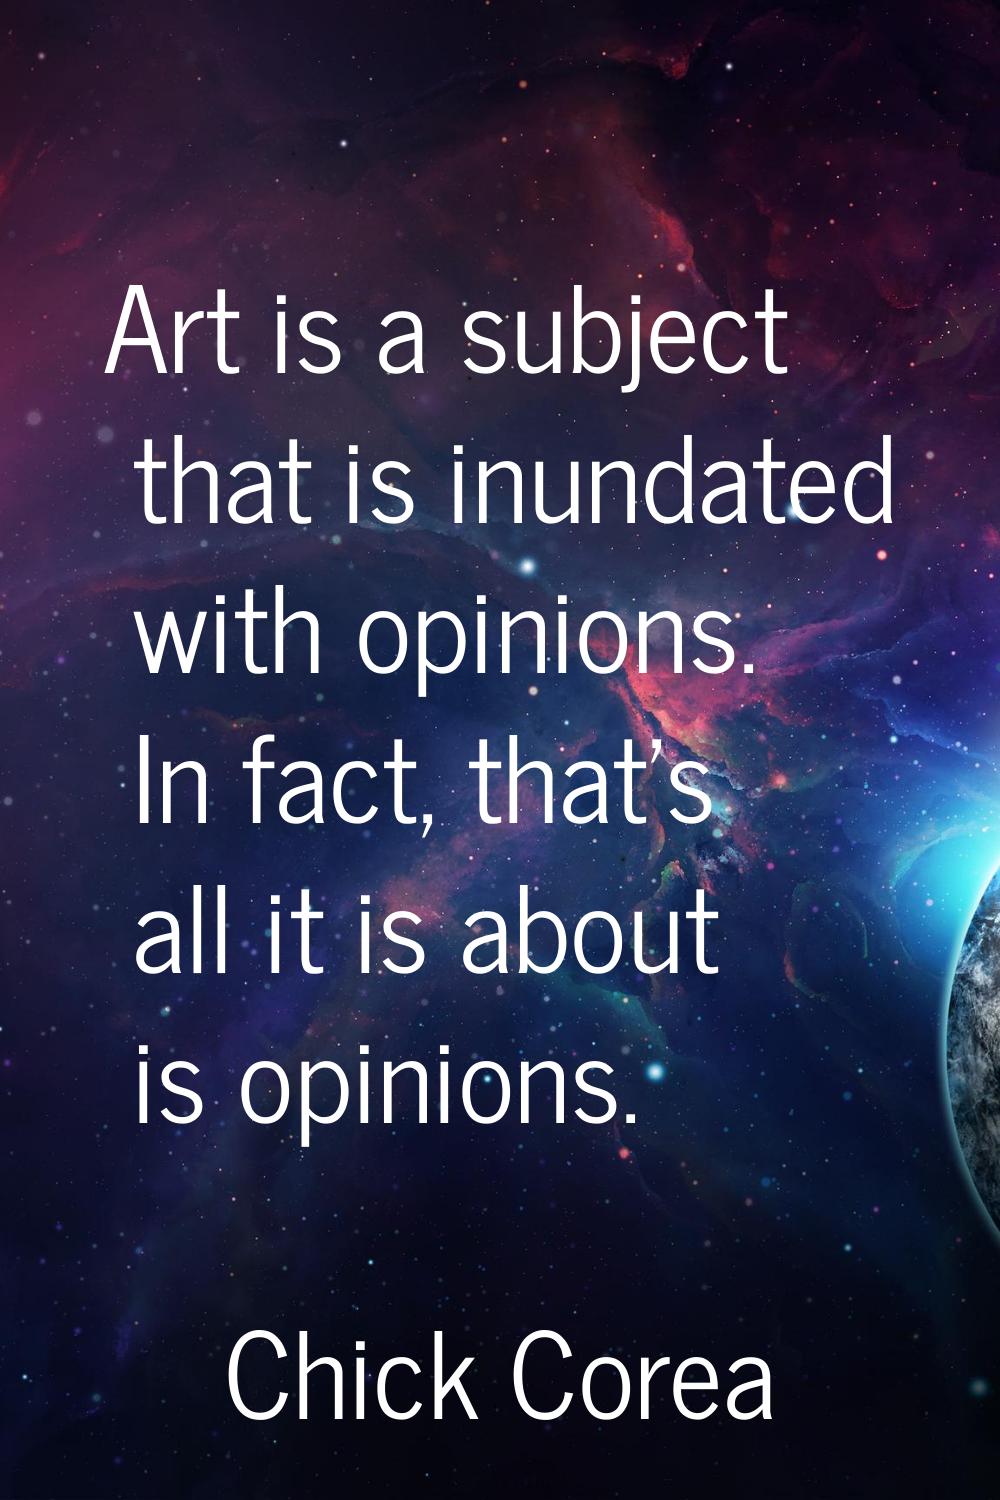 Art is a subject that is inundated with opinions. In fact, that's all it is about is opinions.